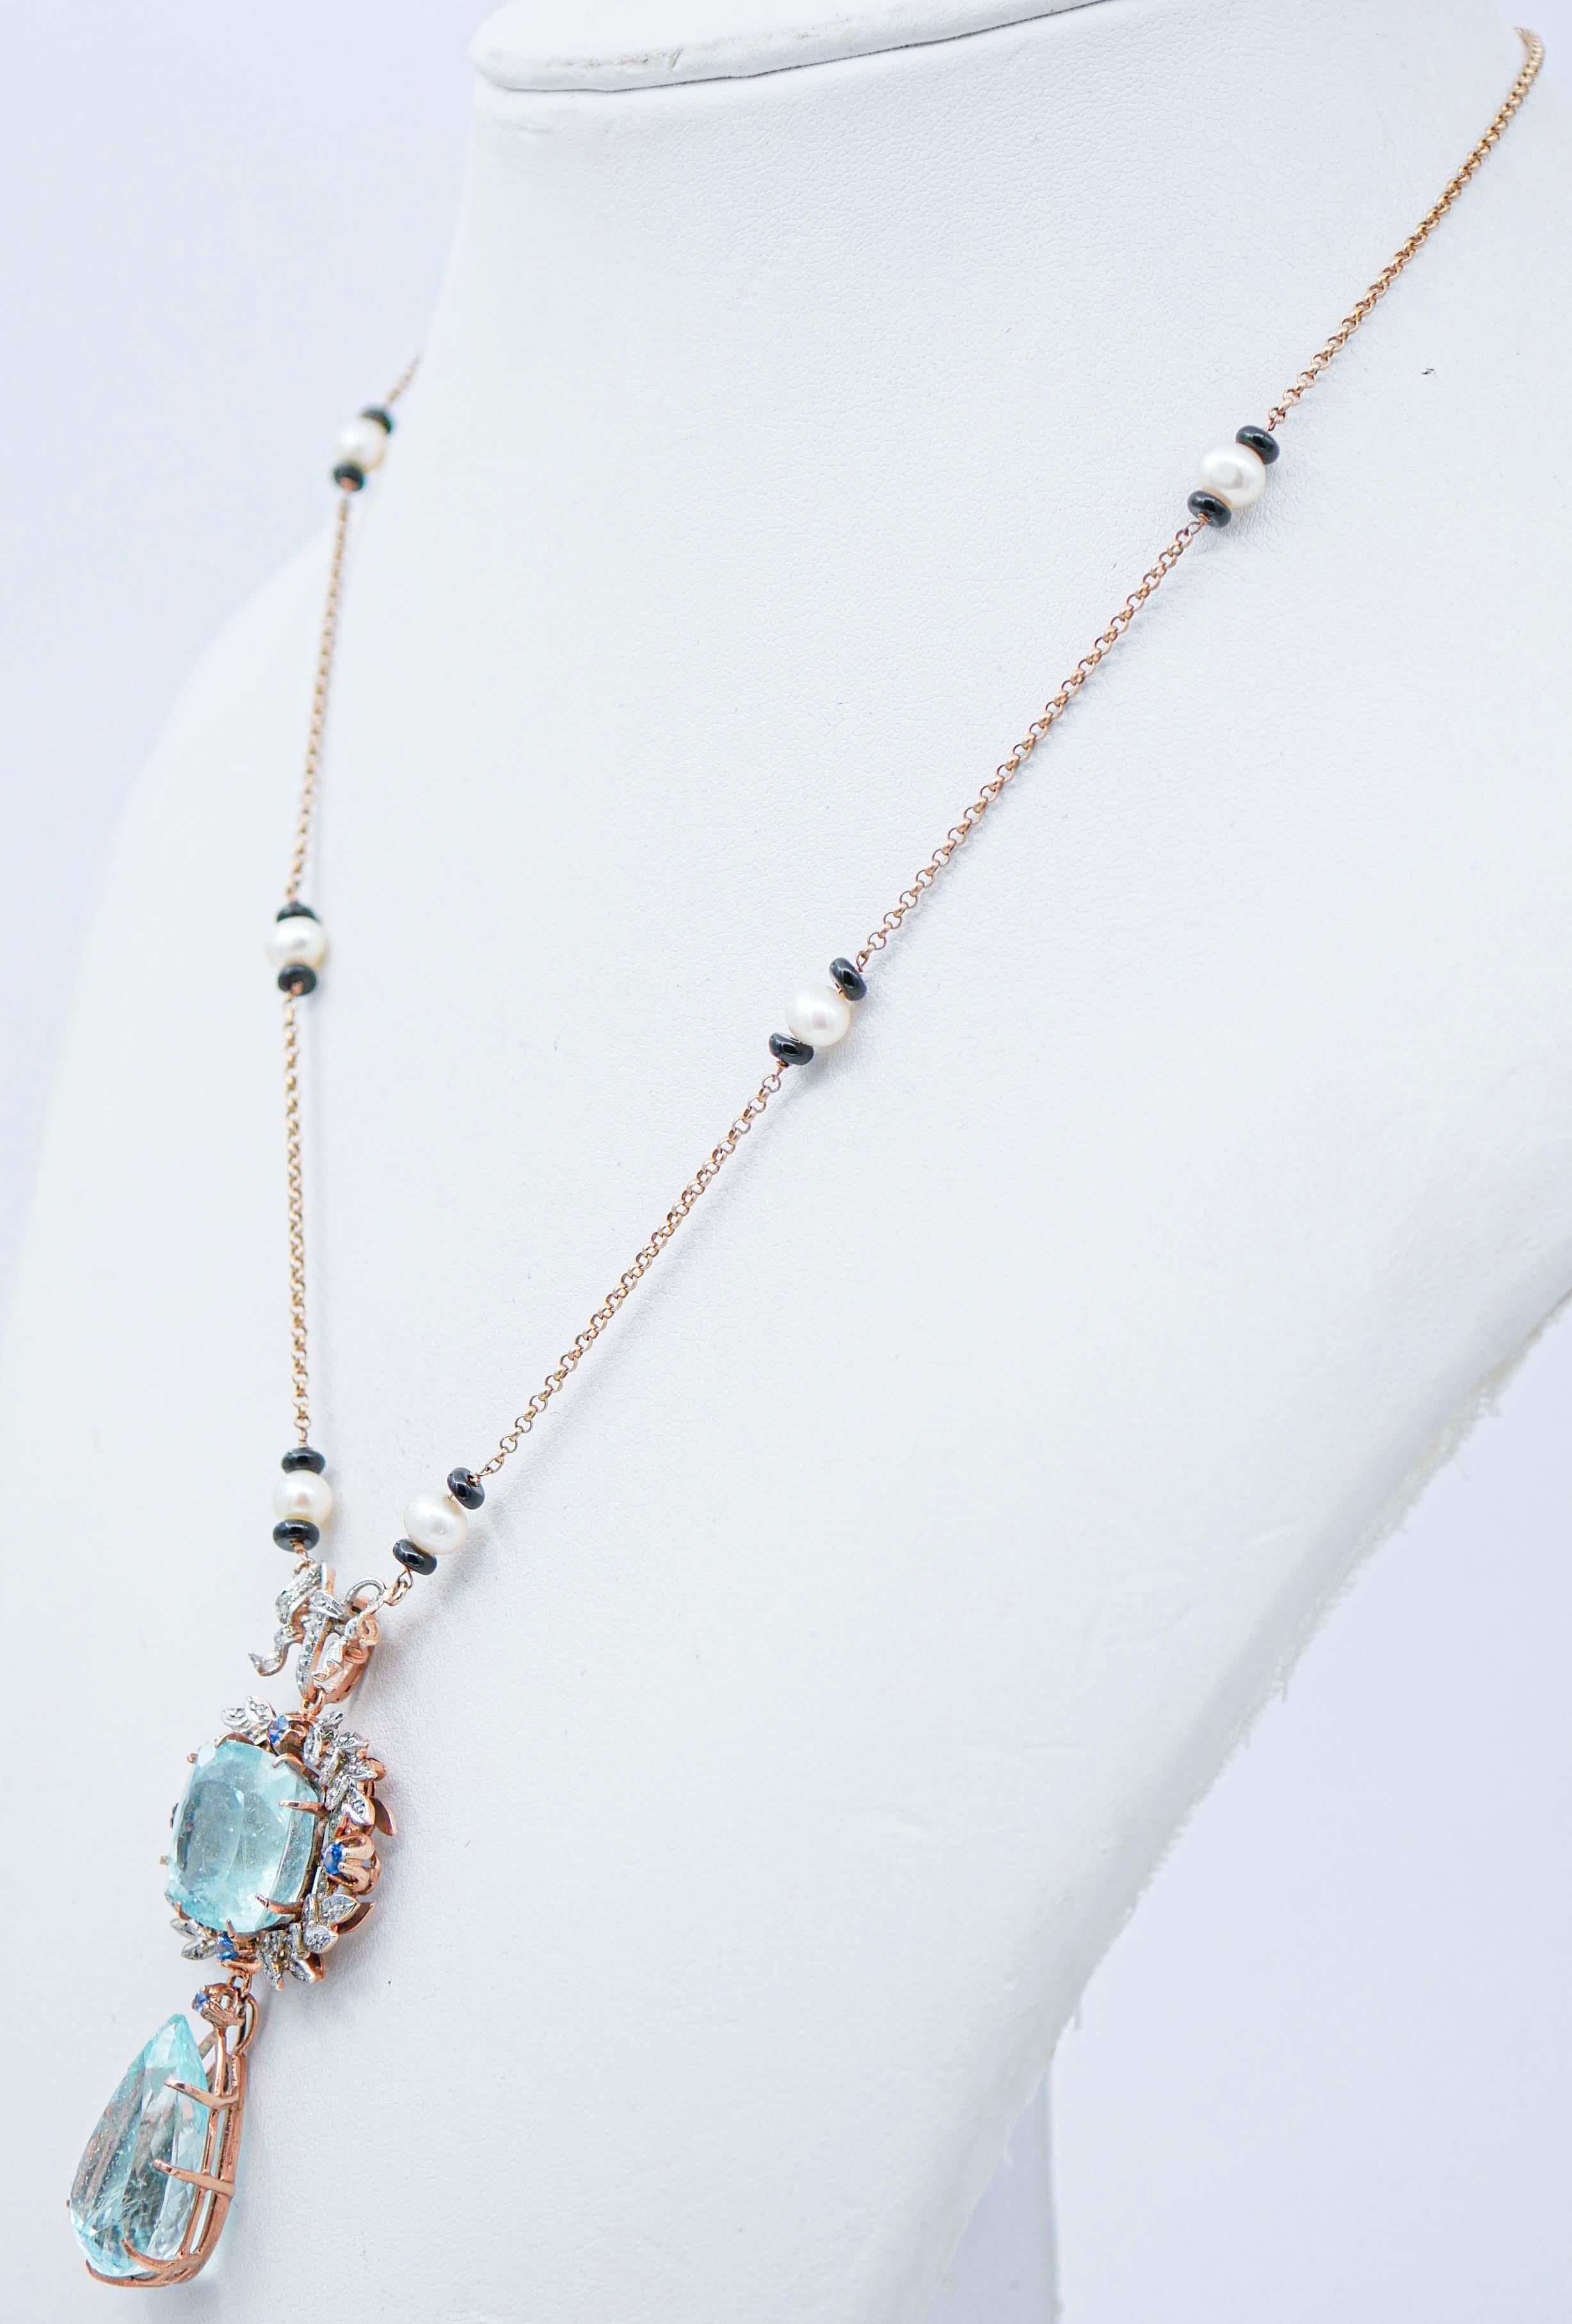 Mixed Cut Aquamarine, Sapphires, Diamonds, Onyx, Pearls, Gold and Silver Pendant Necklace For Sale